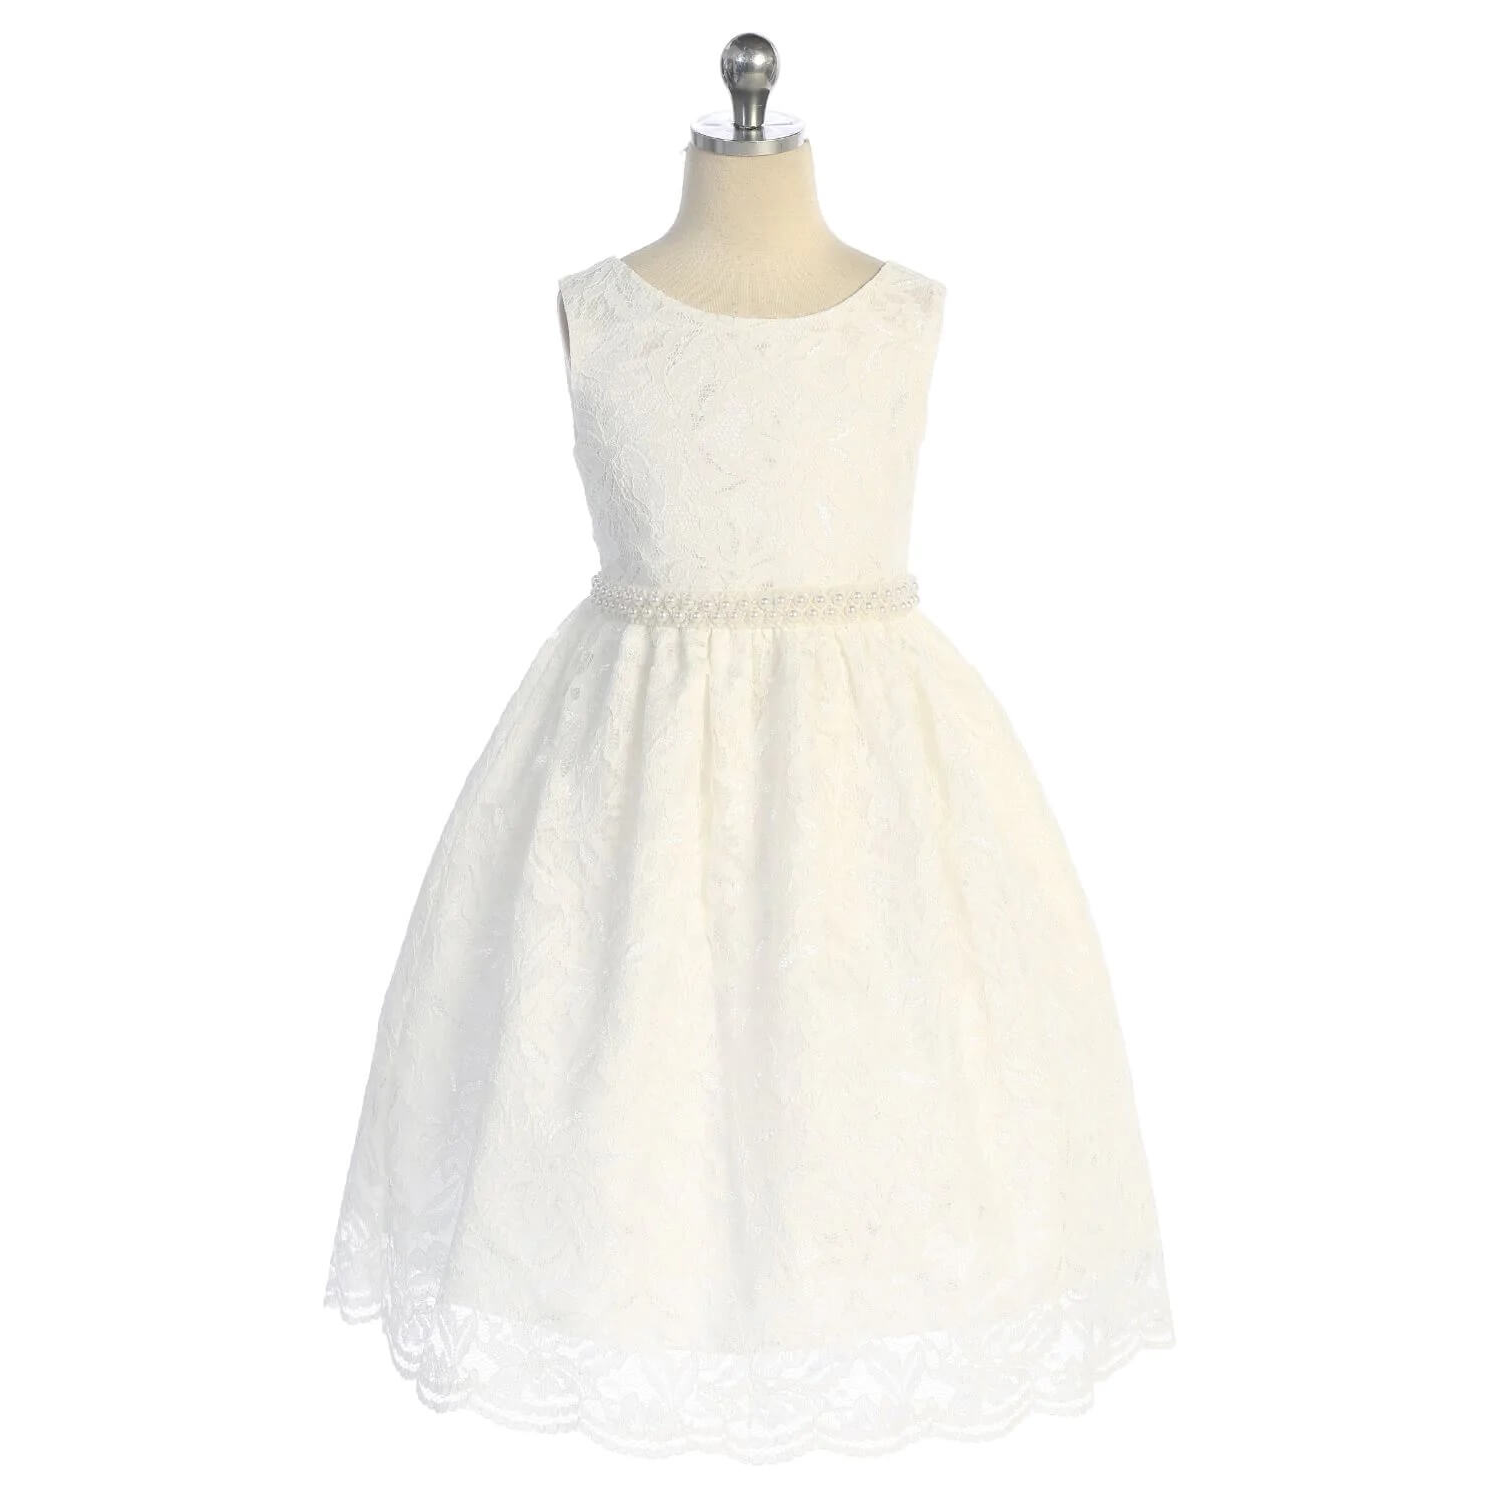 Girls white party dress with pearl trim waist band